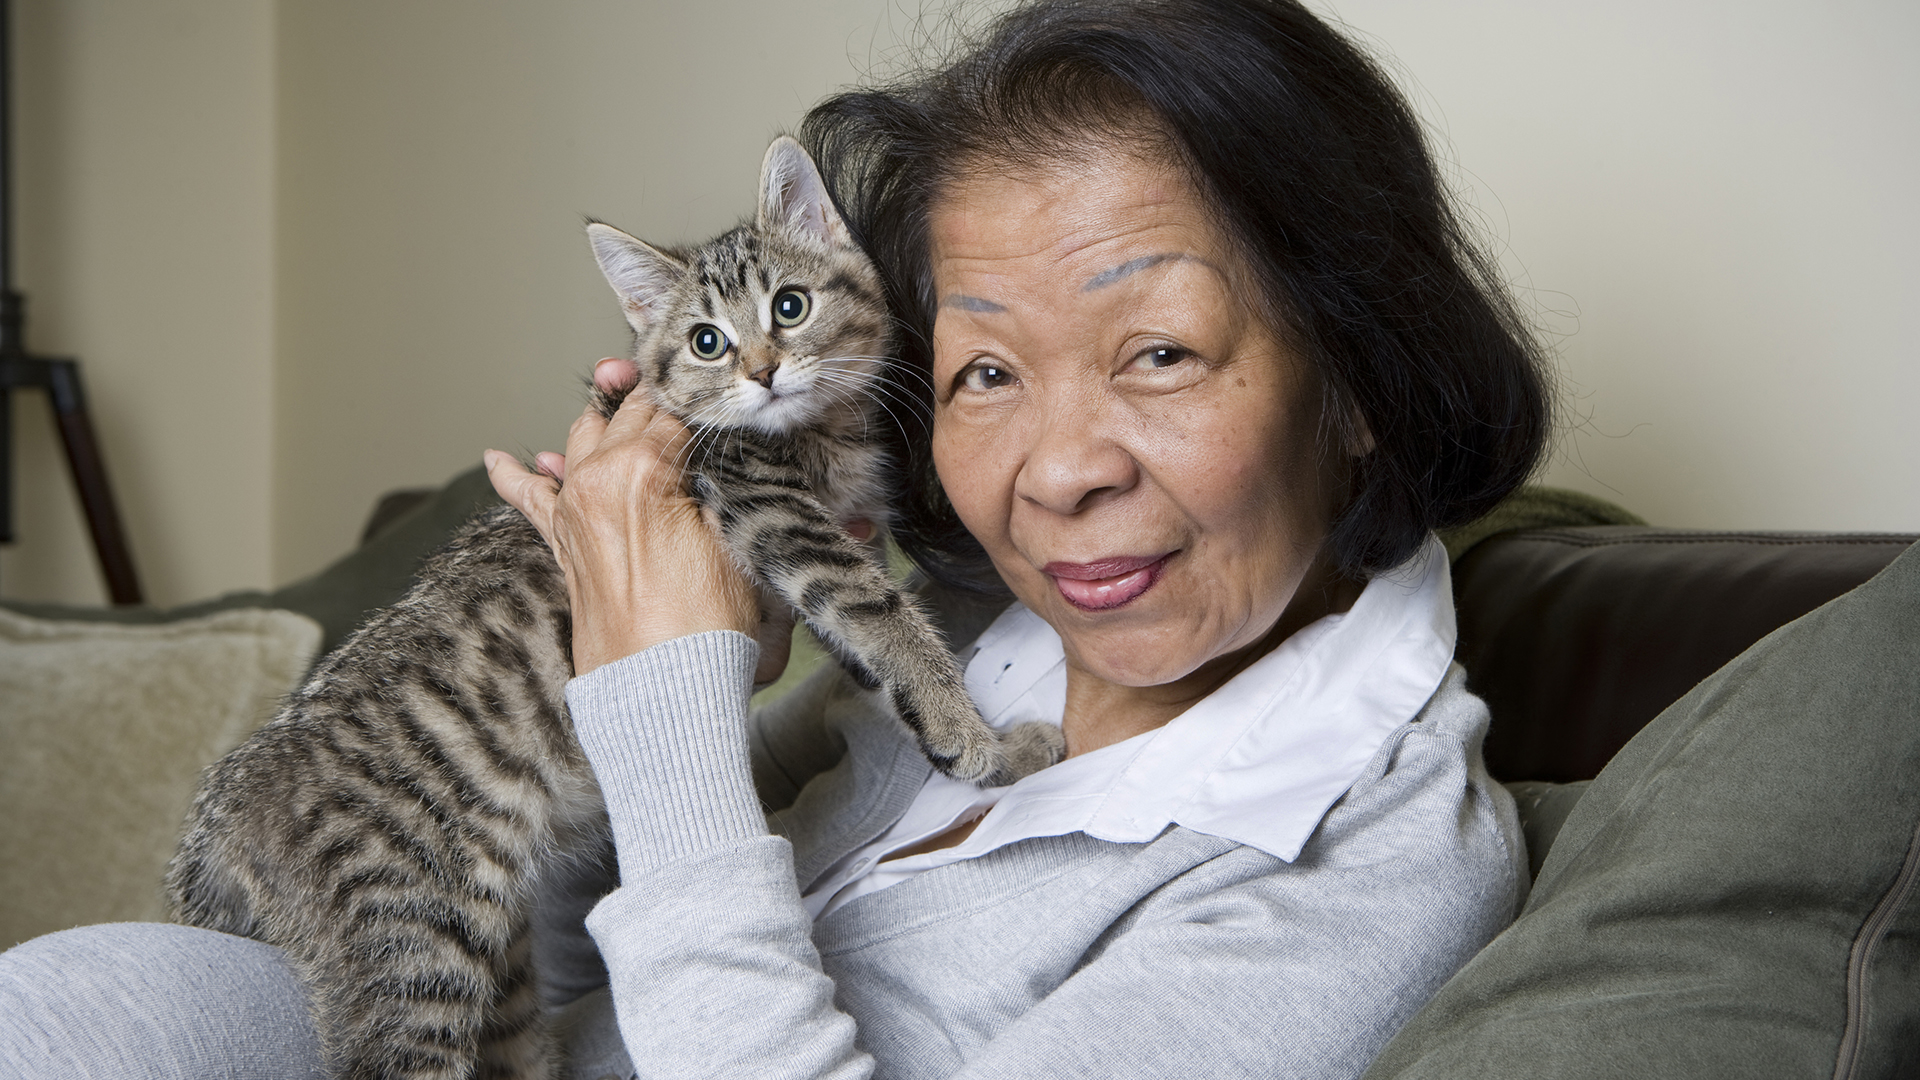 are cats good pets for seniors? This senior woman loves her young cat!